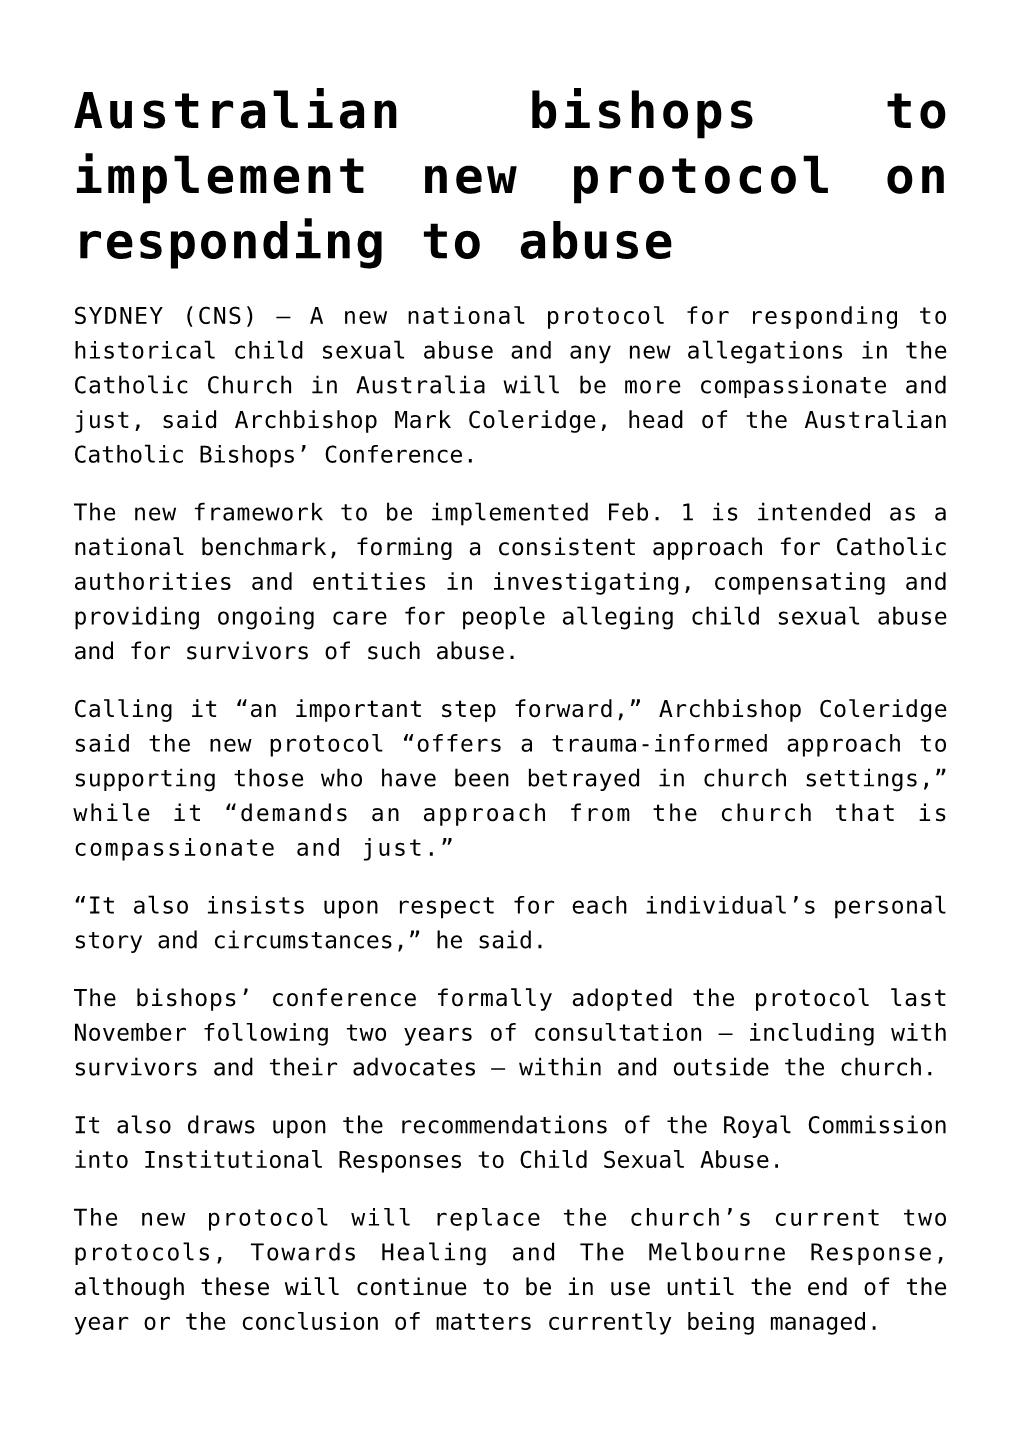 Australian Bishops to Implement New Protocol on Responding to Abuse